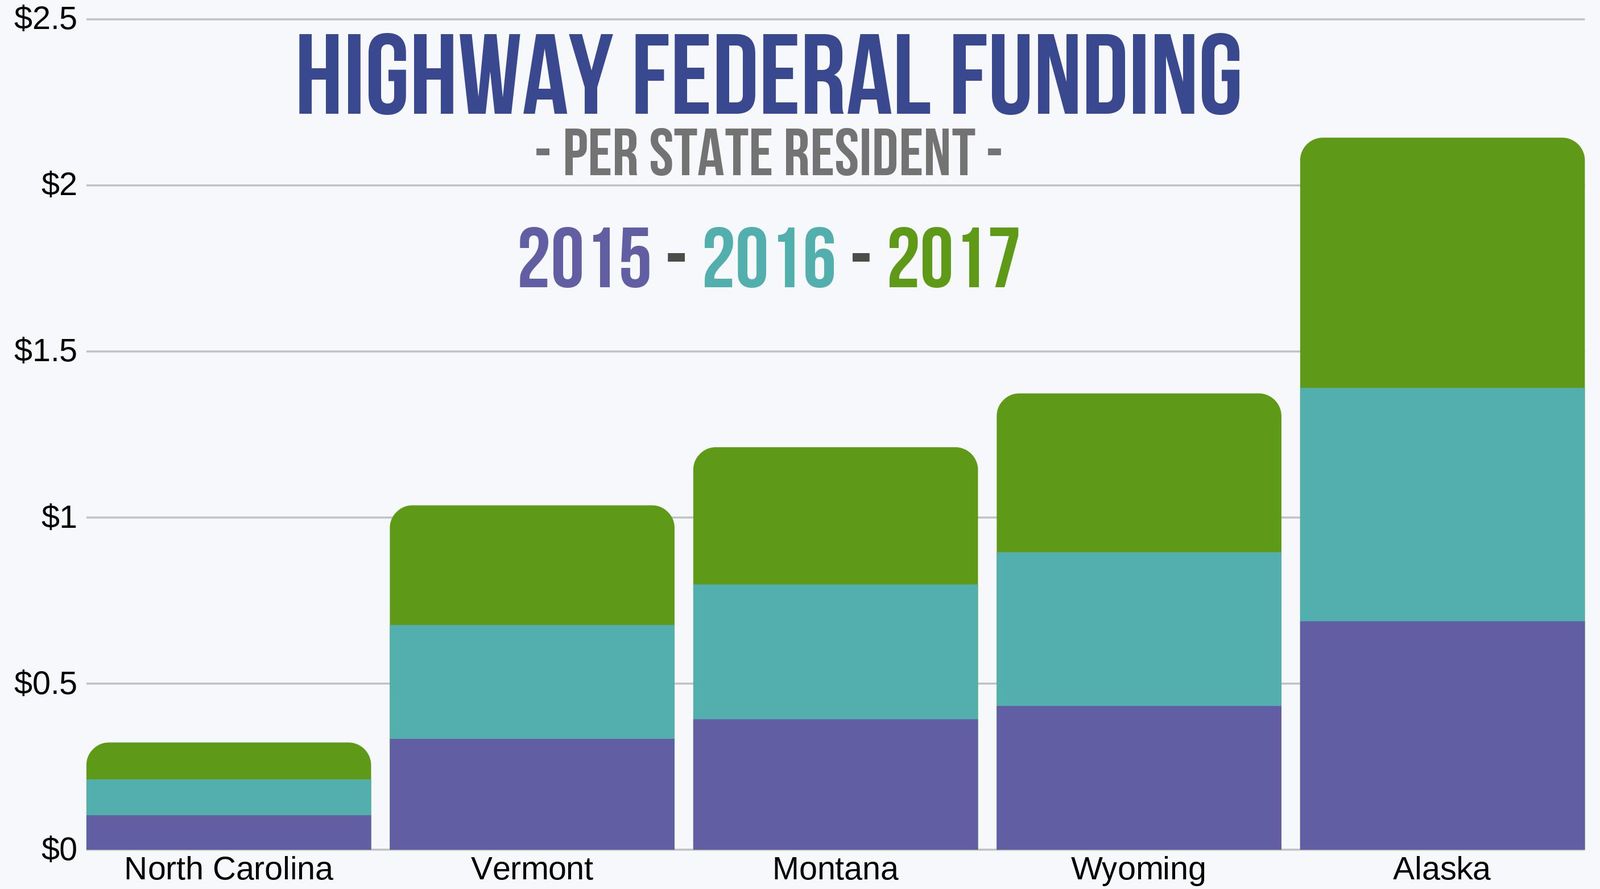 Federal Funding for Highways in 5 States